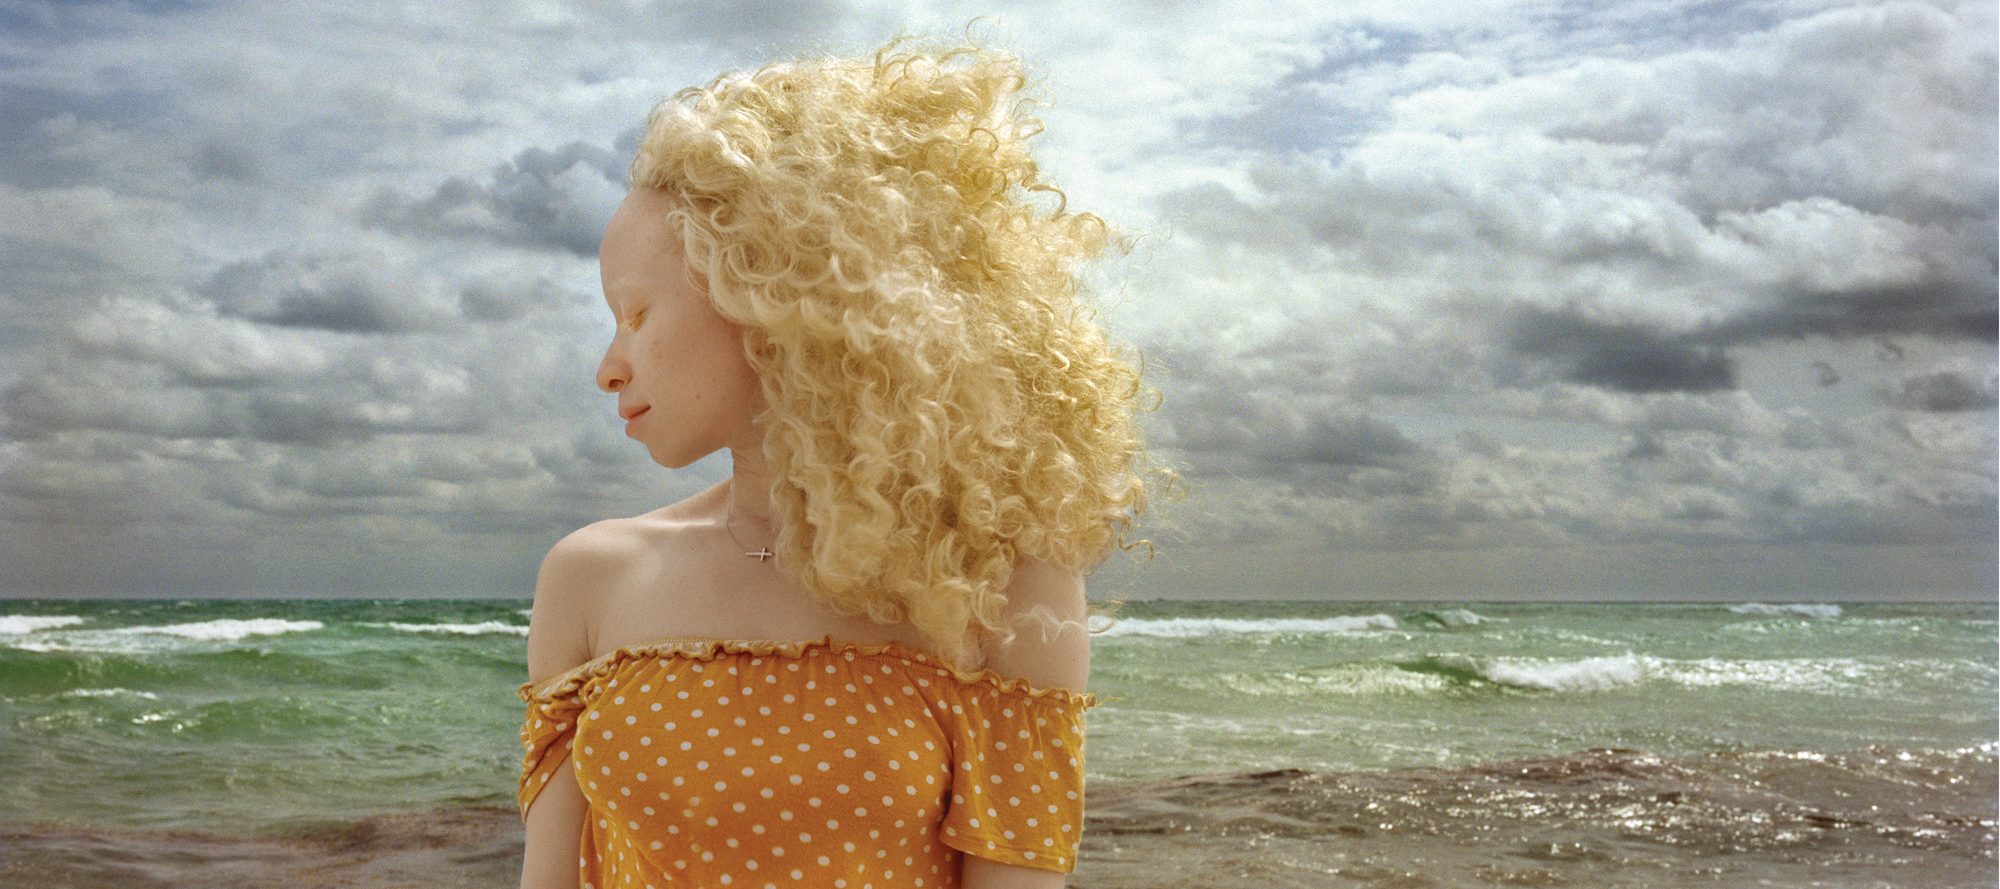 In front of a stormy ocean, a woman with light skin and blonde, wind-blown hair stands with head turned in profile and eyes closed.